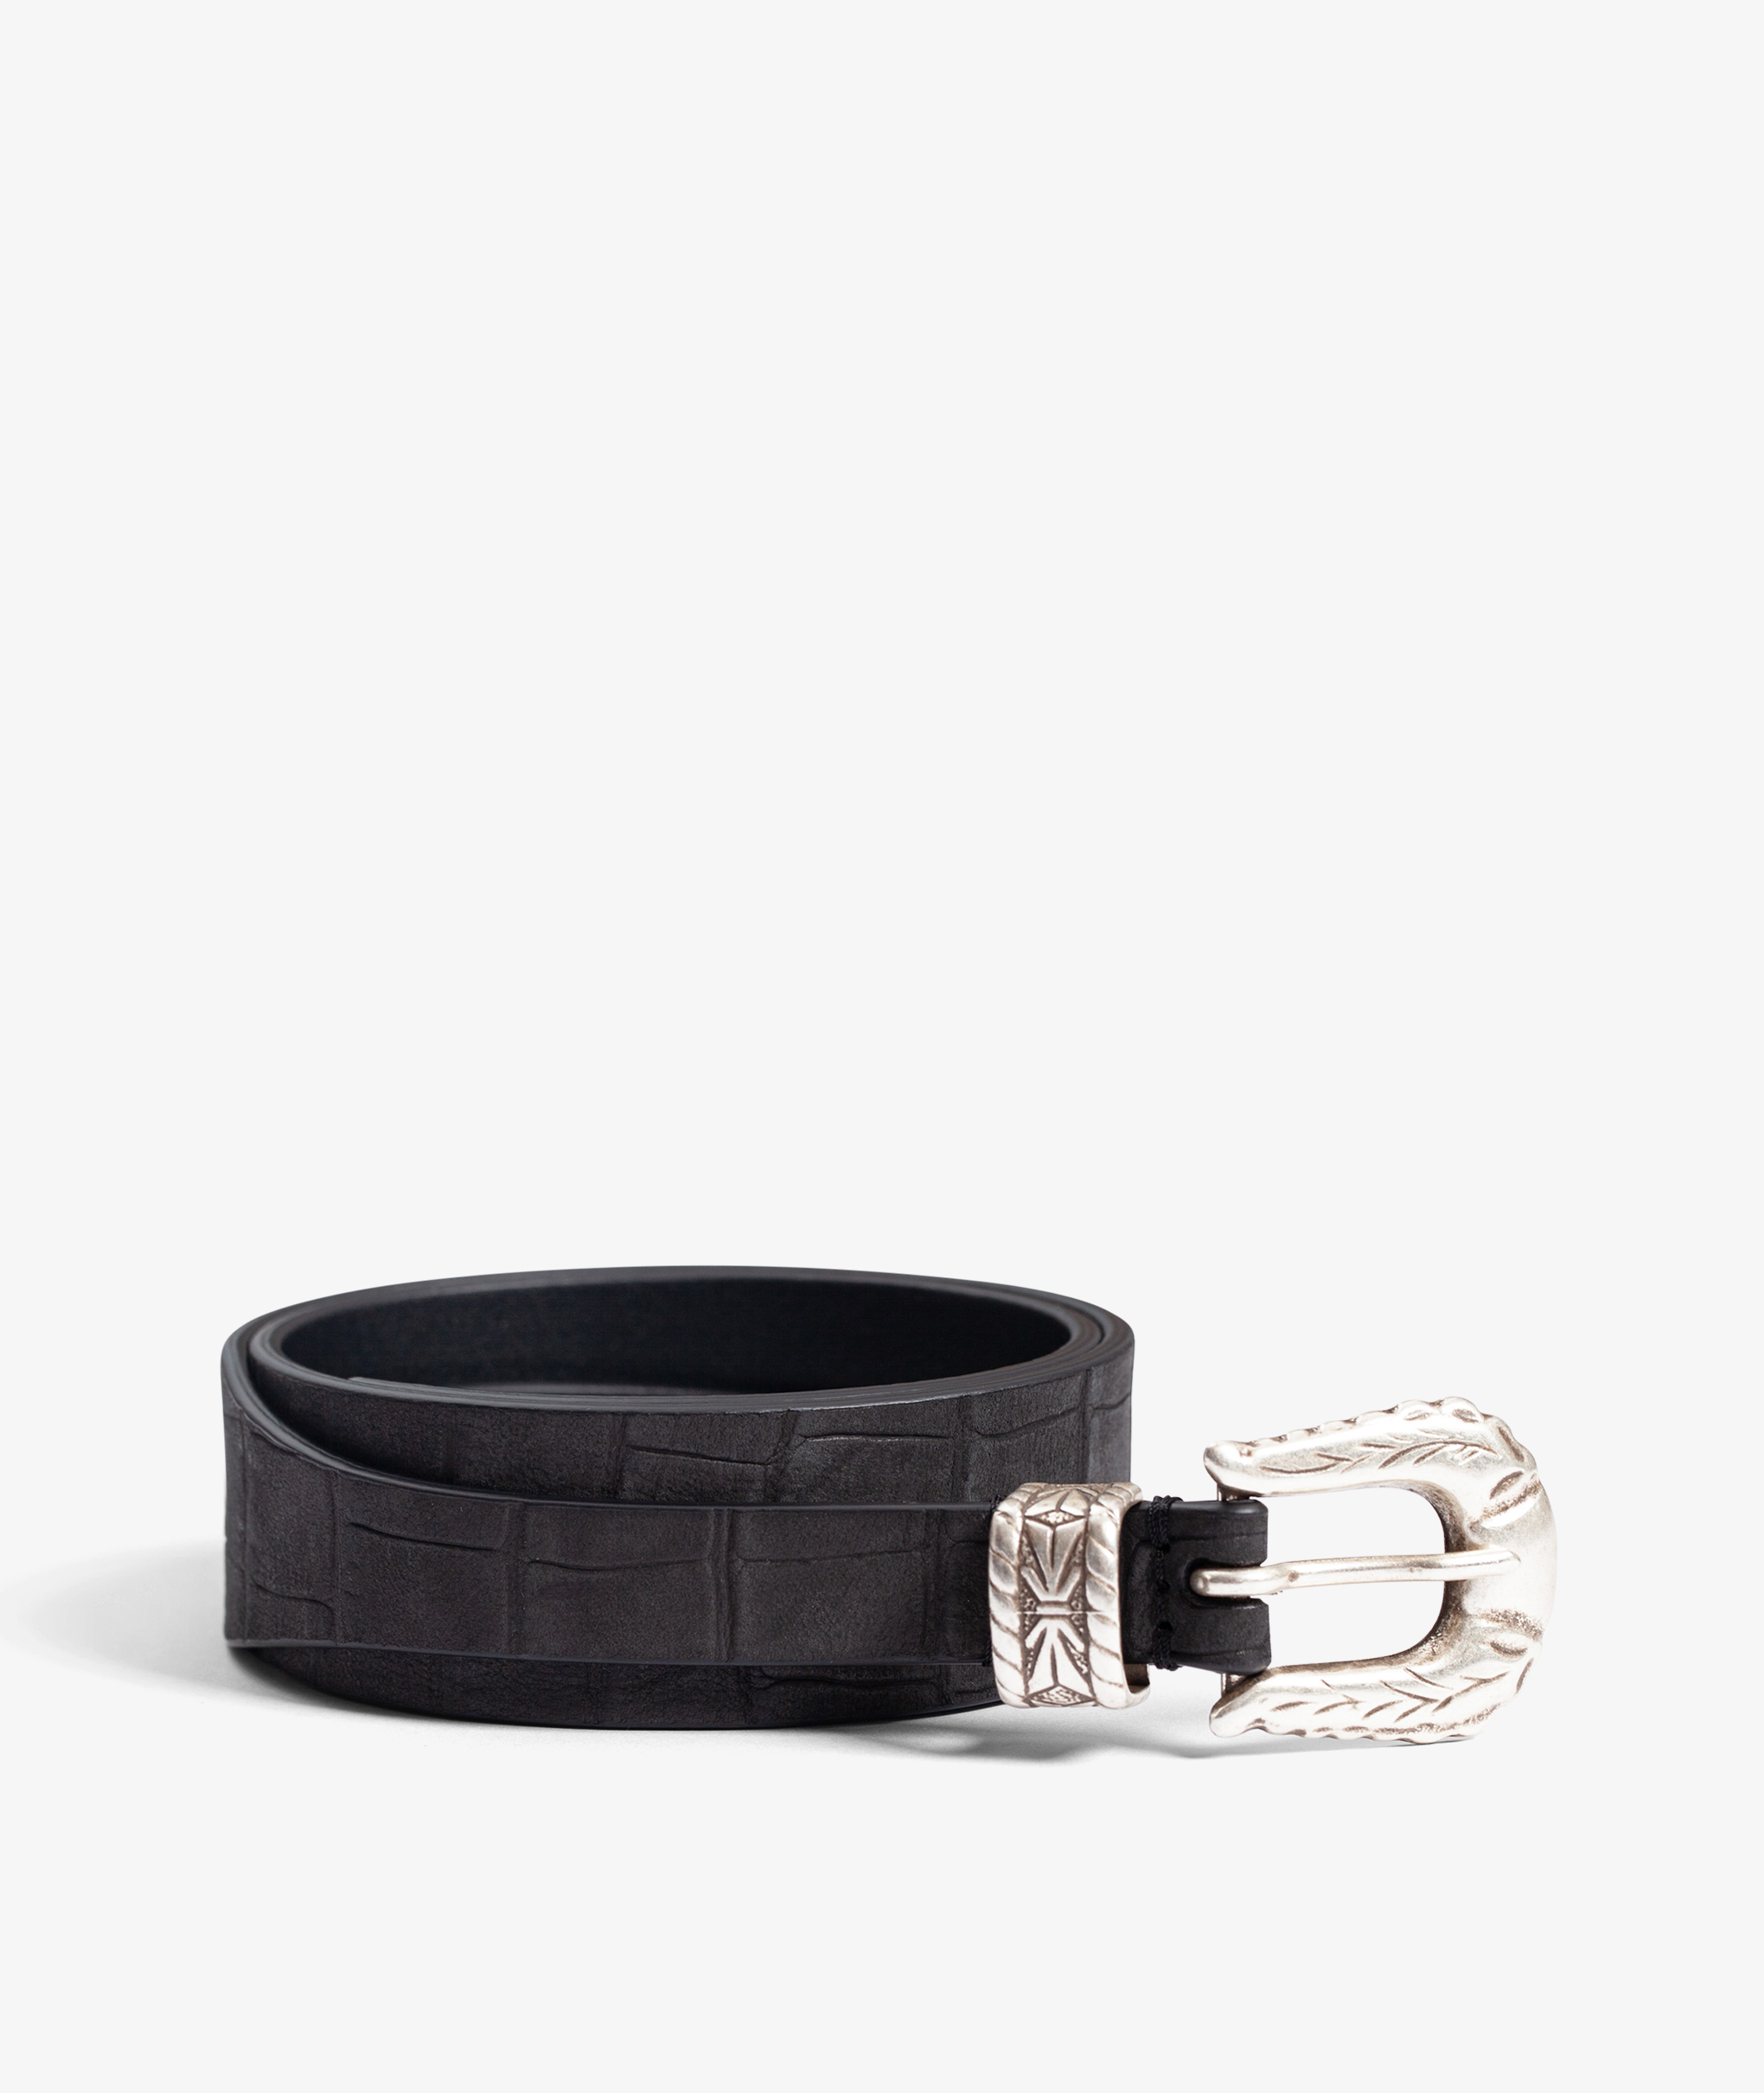 Norse Store | Shipping Worldwide - Anderson's Croc Leather Belt - Black